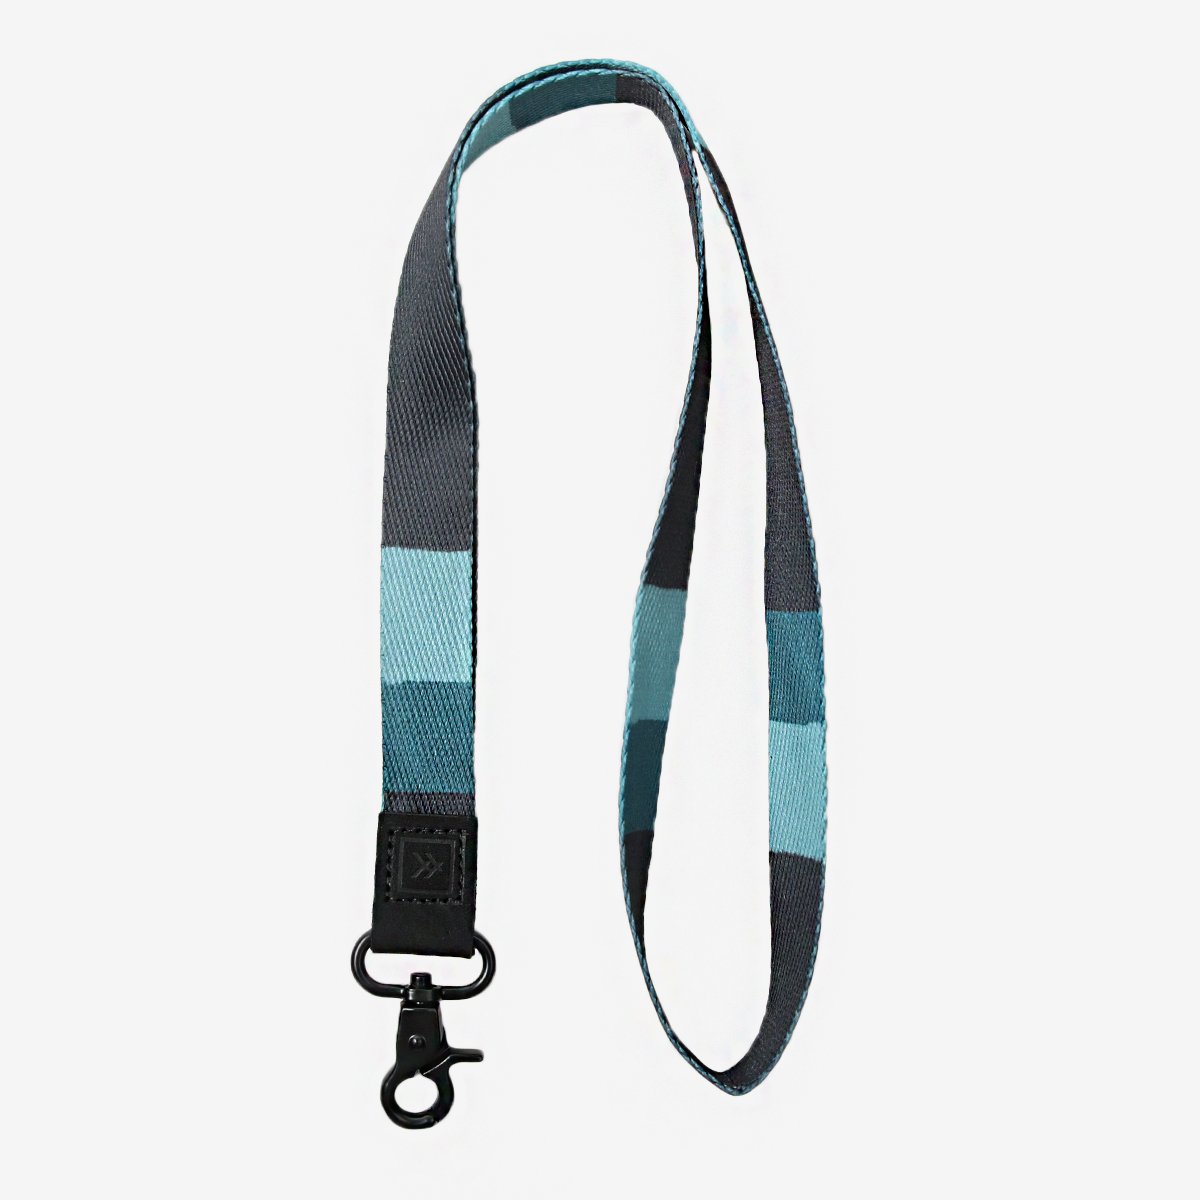 Blue and black striped neck lanyard